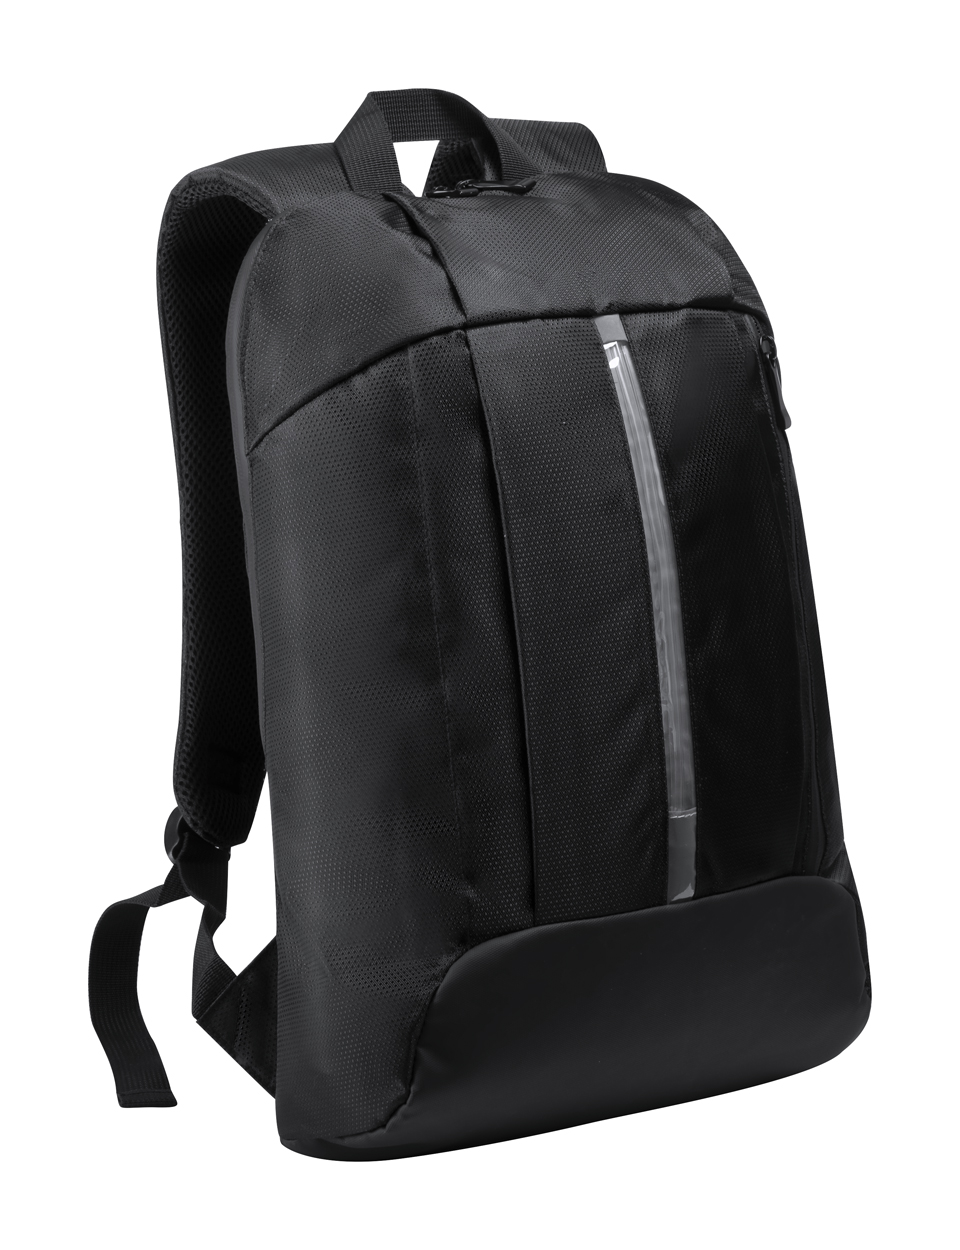 Dontax backpack Black